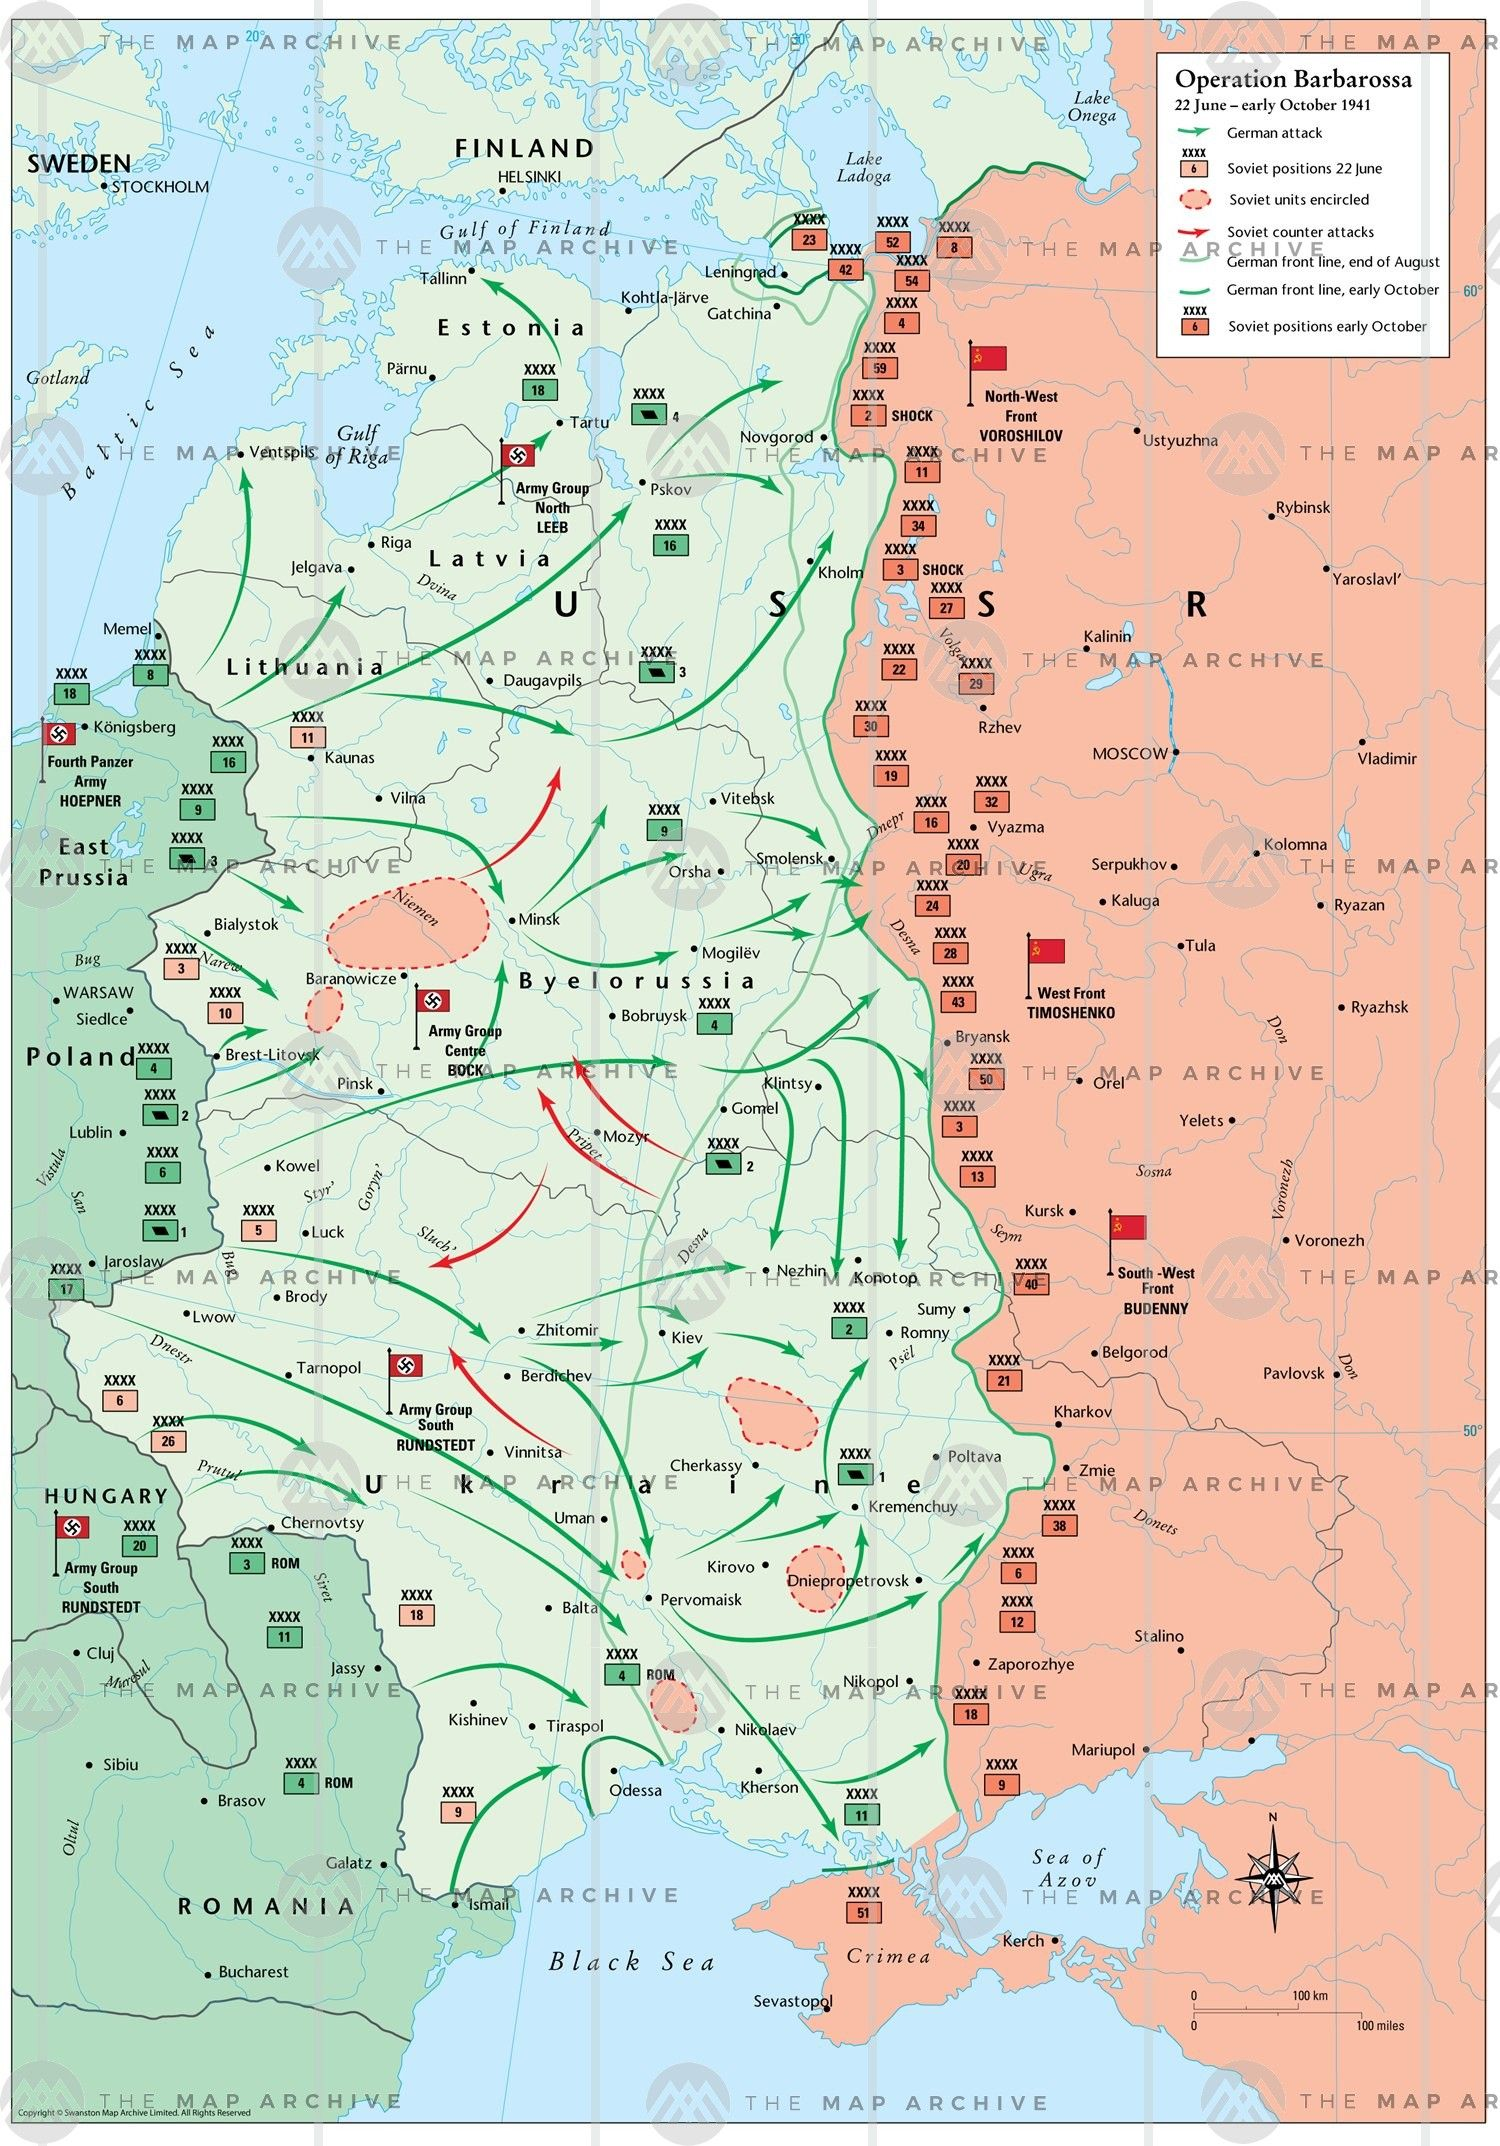 File:Operation barbarossa 06-10 1941.png